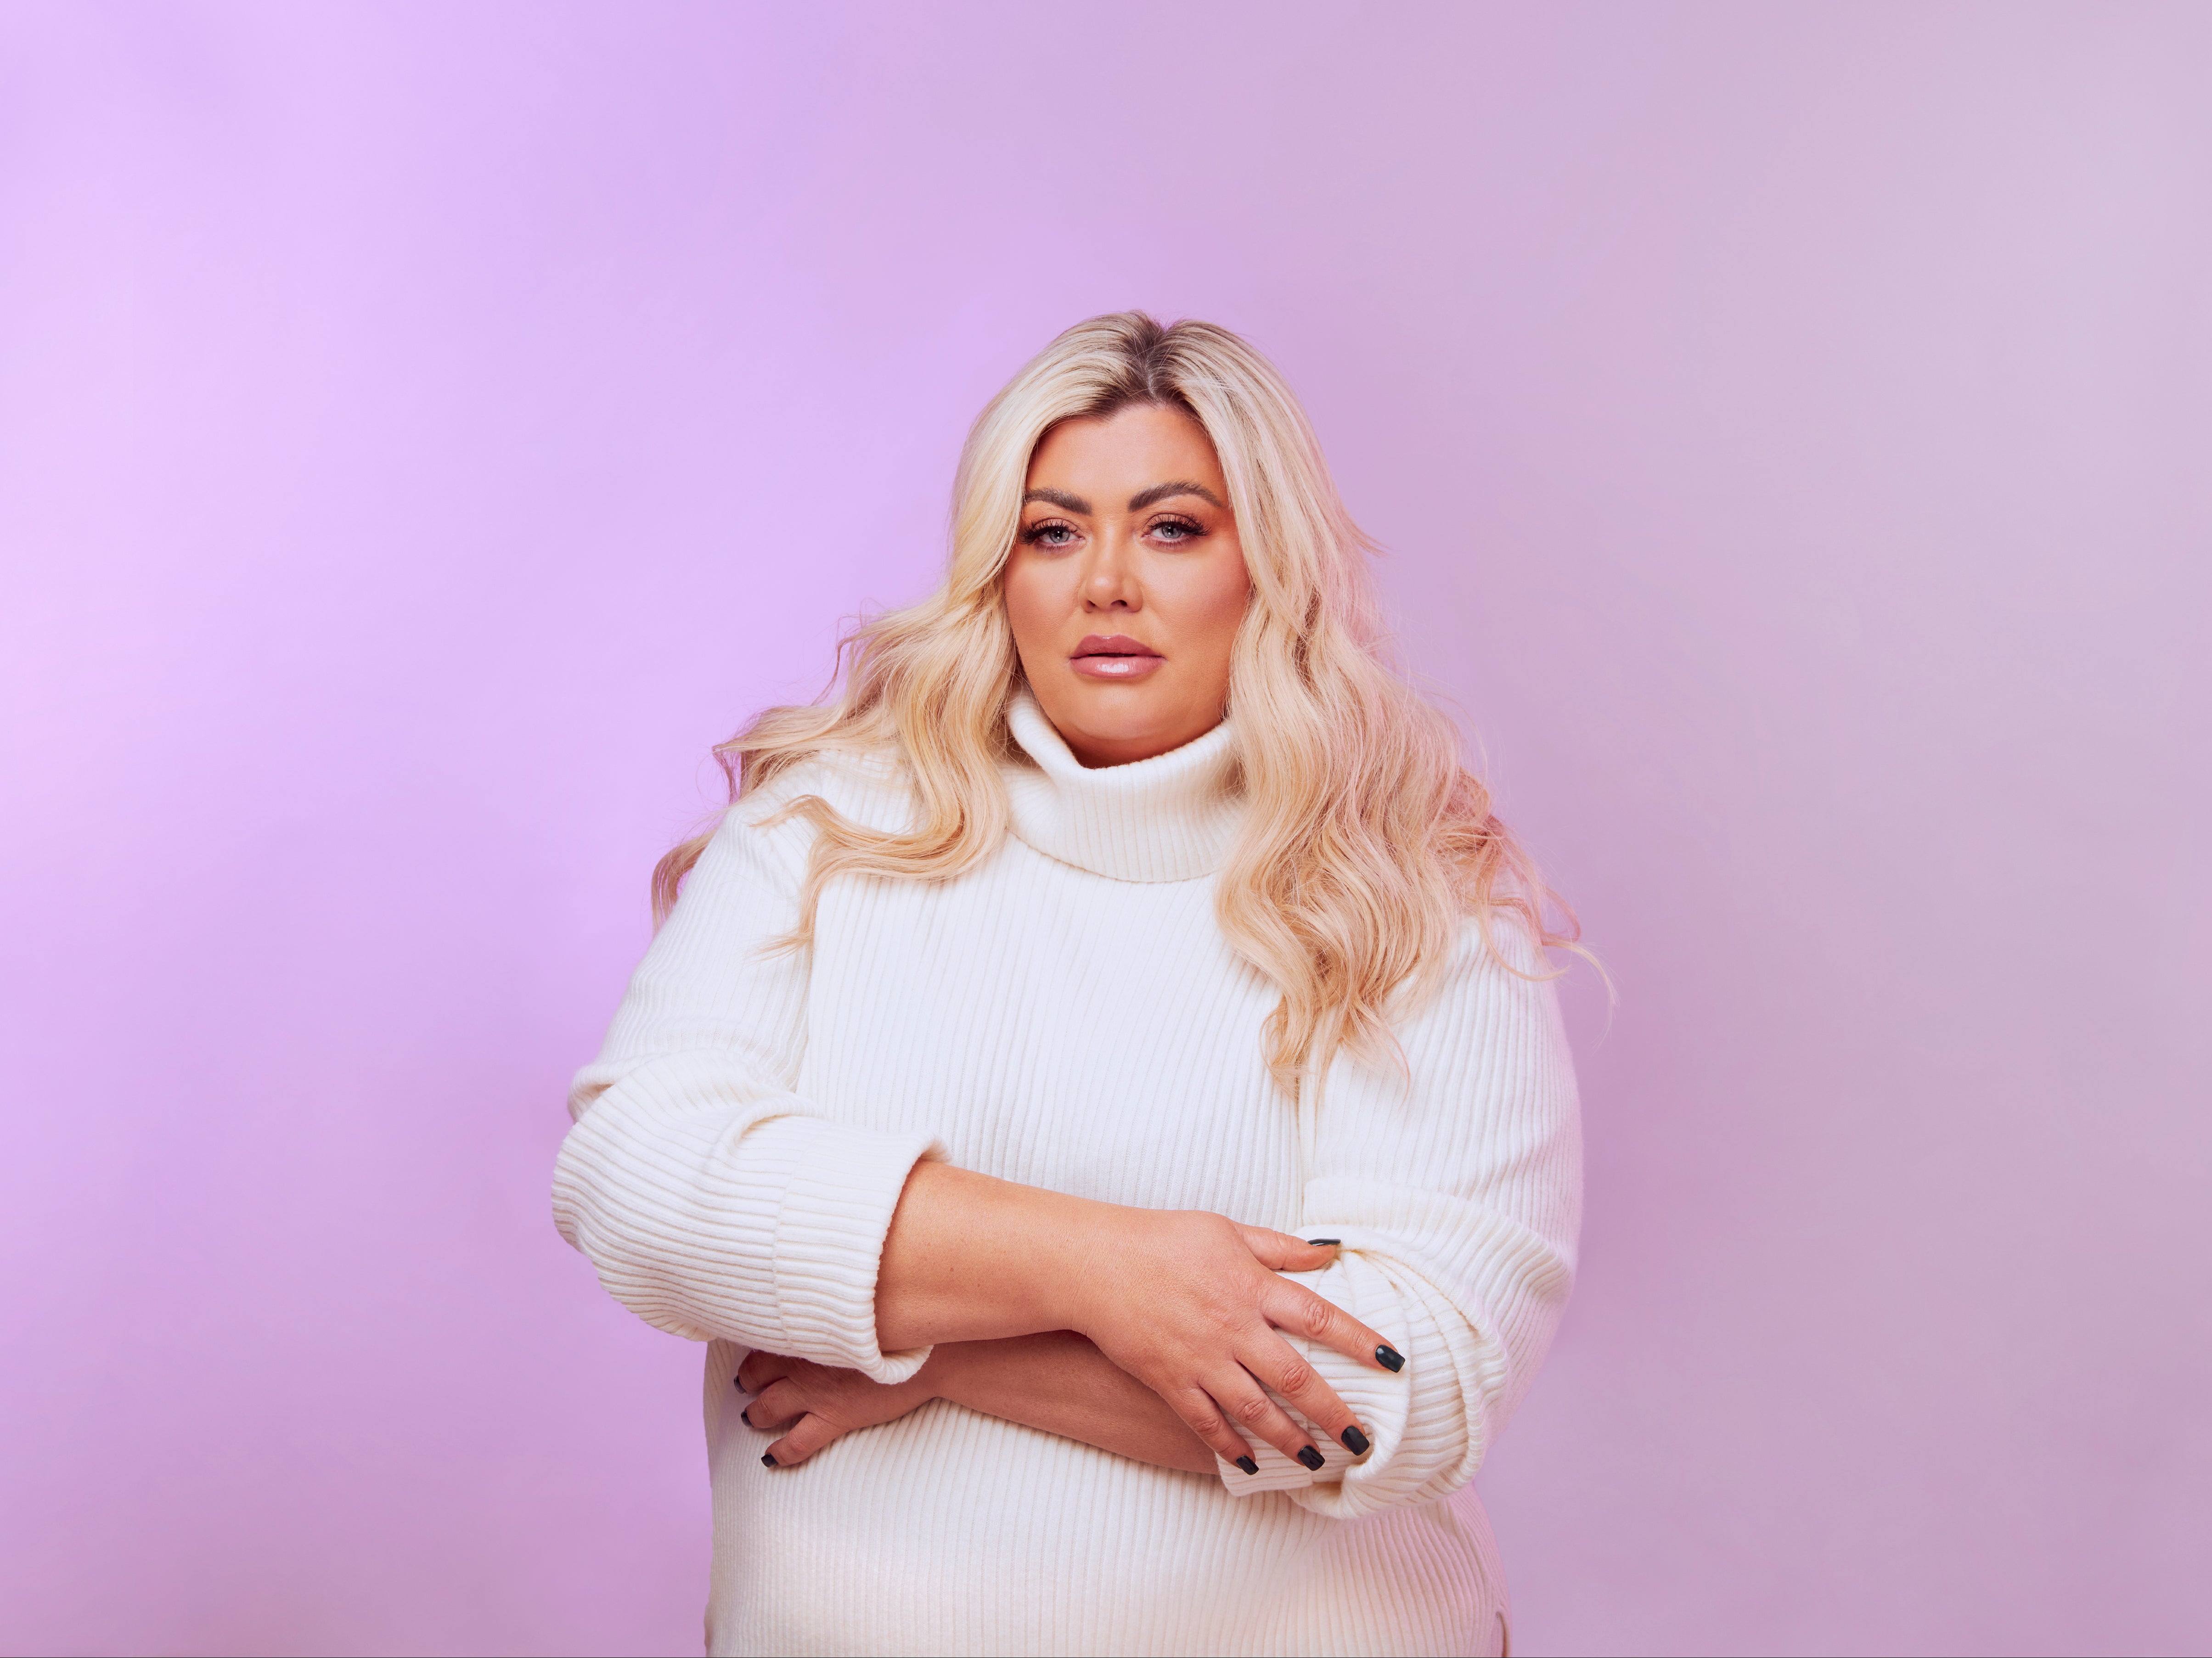 Gemma Collins faces her 20-year struggle with self-harm